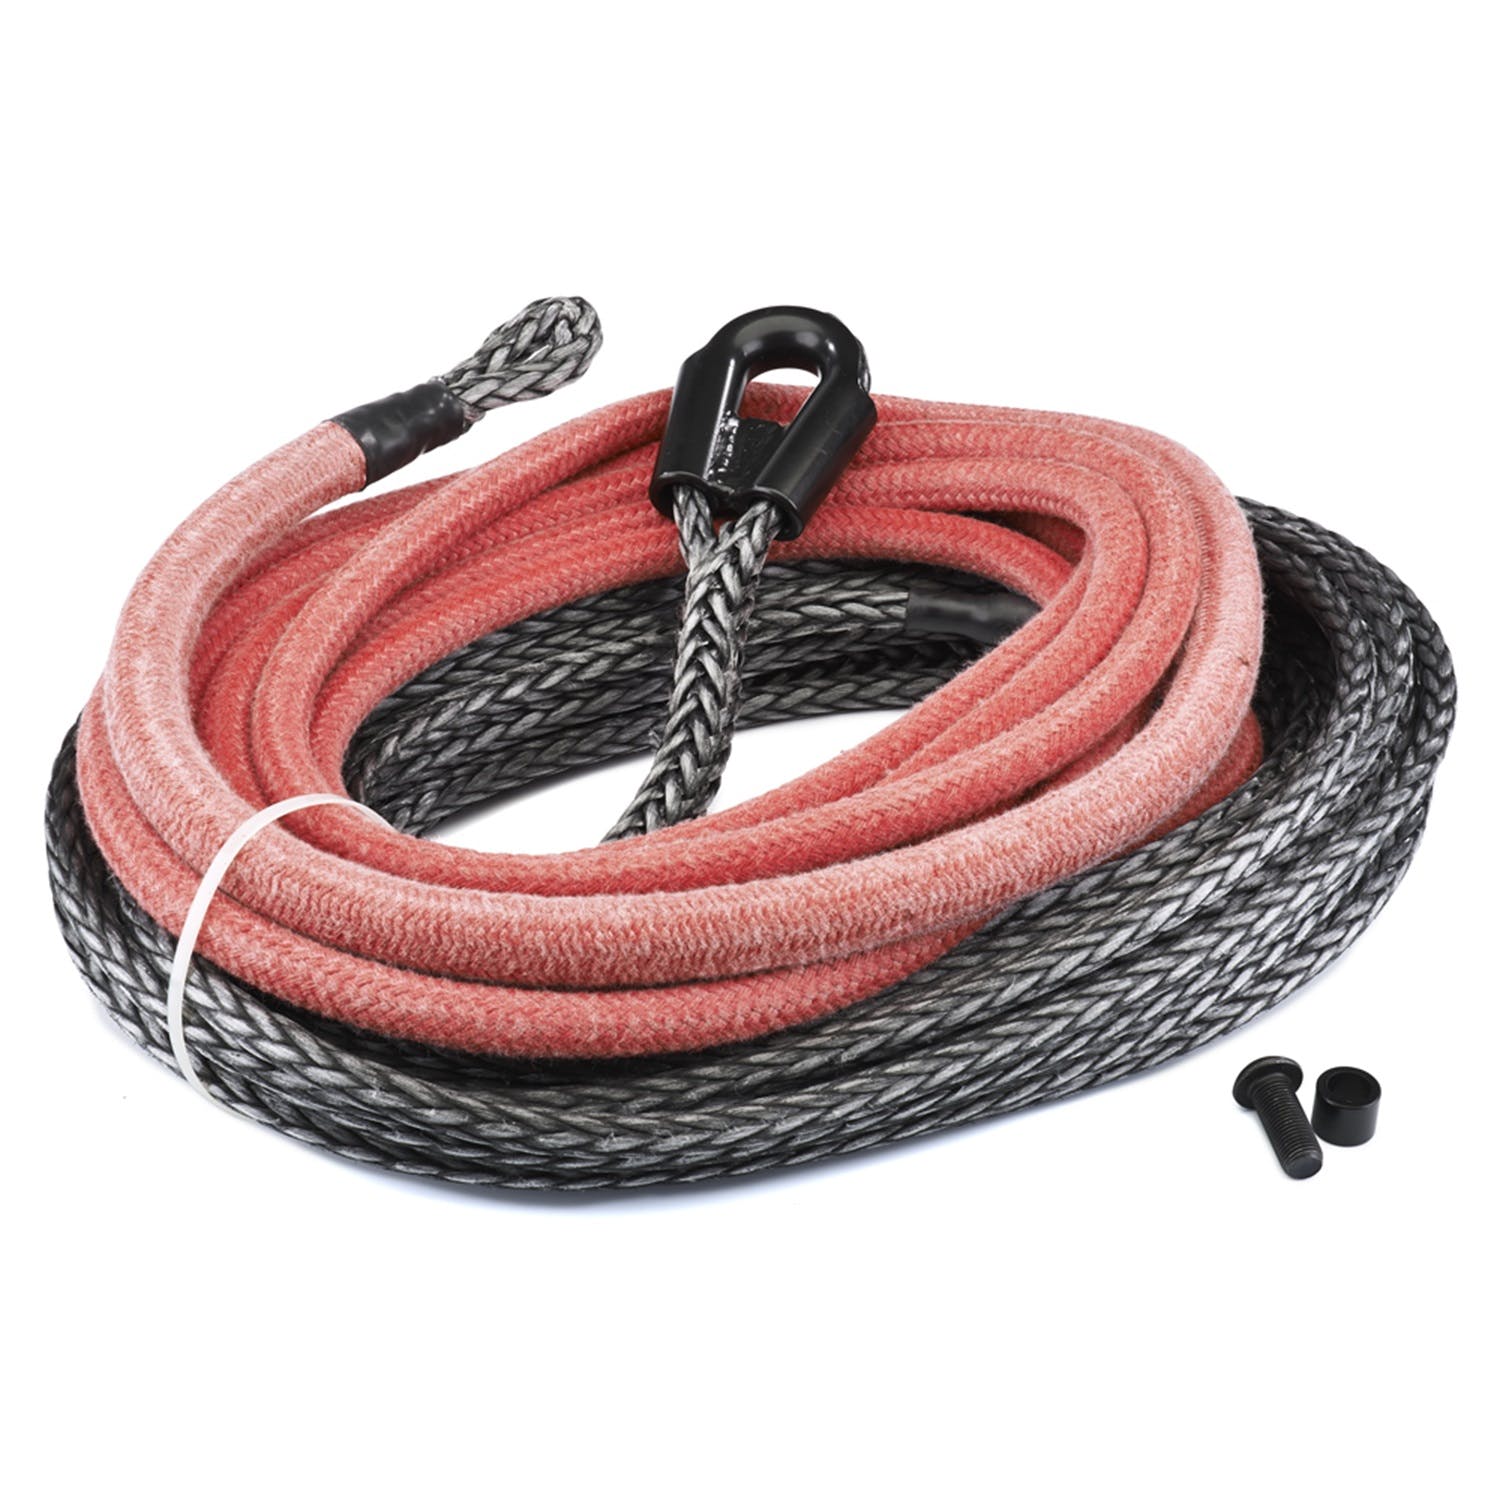 WARN 91820 Standard Duty and Spydura® Synthetic Rope and Extensions